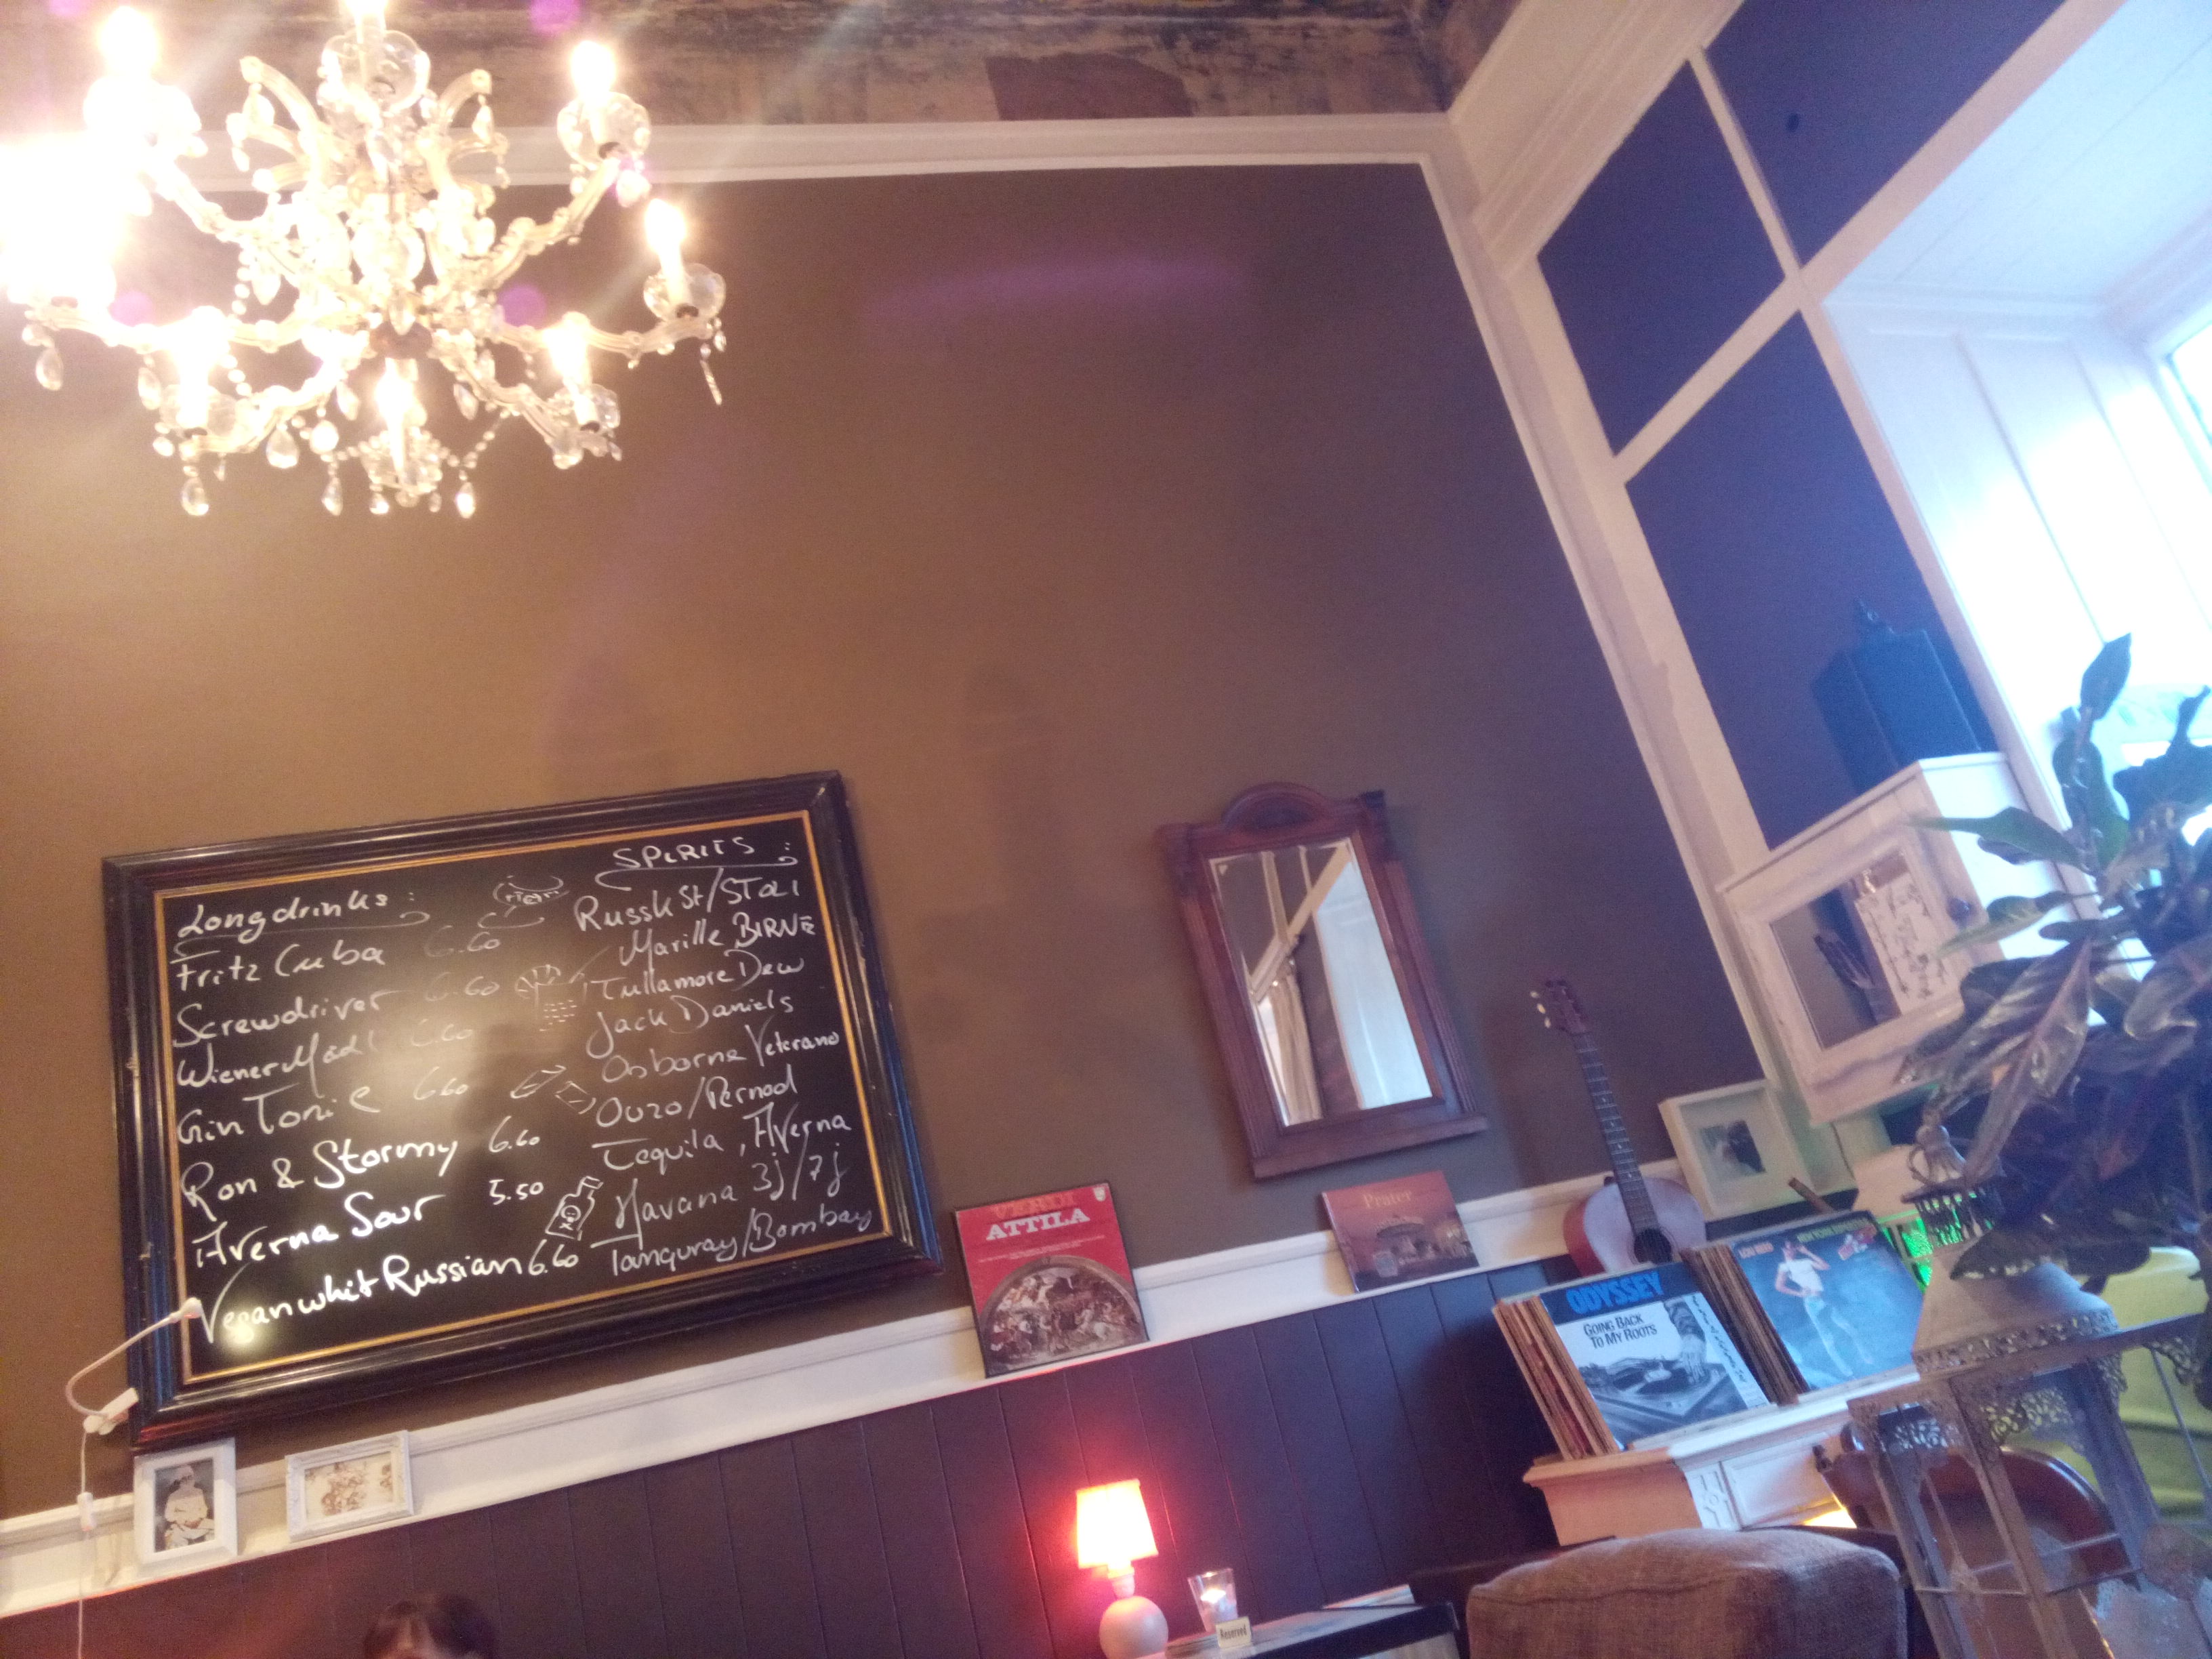 Cafe interior, with a chandelier in the top left, a blackboard with writing, brown walls and the tops of chairs